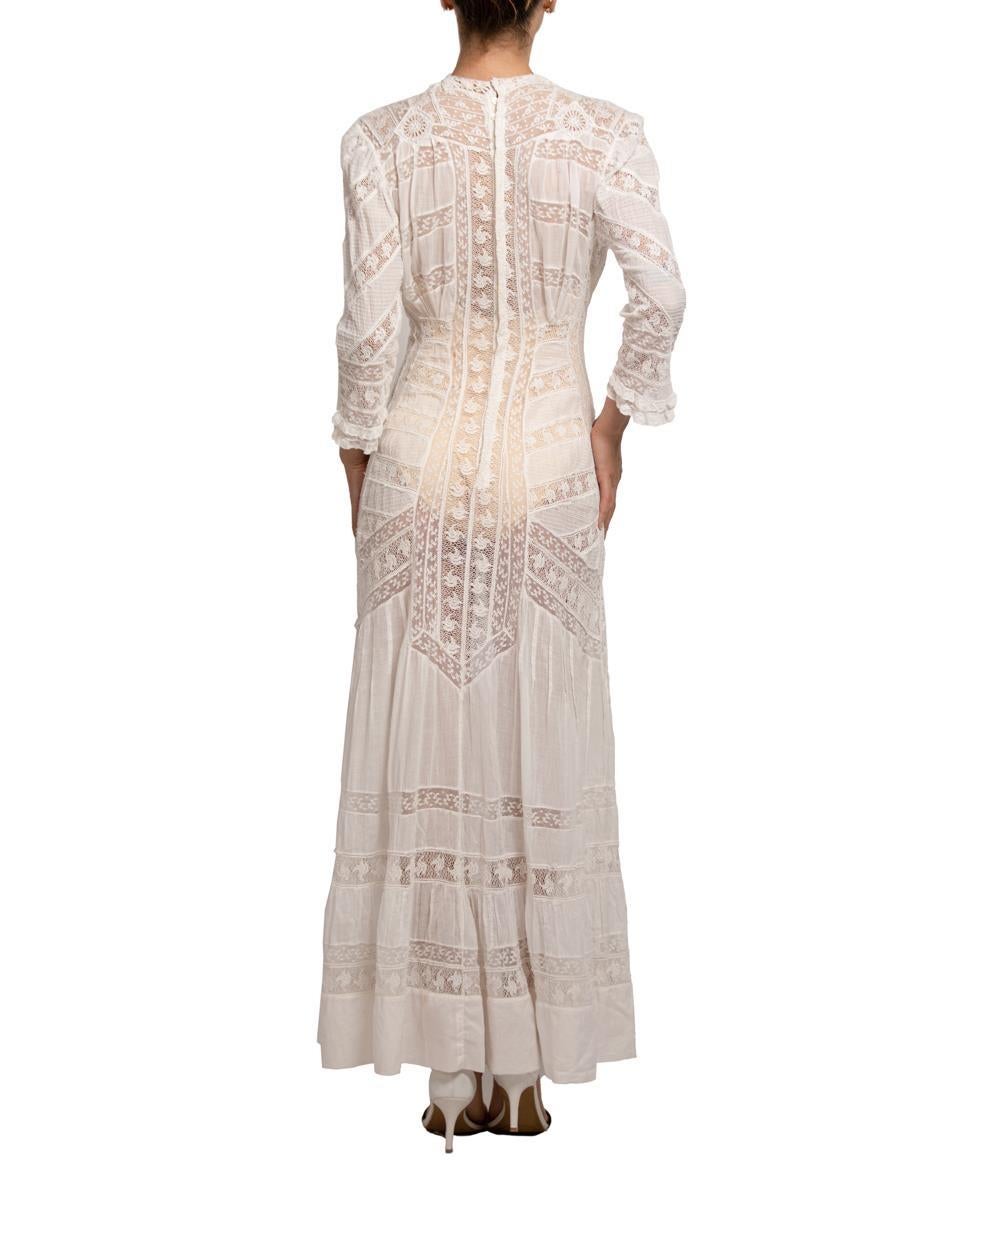 Victorian Cream Organic Cotton Lace Tea Dress With Sleeves For Sale 1